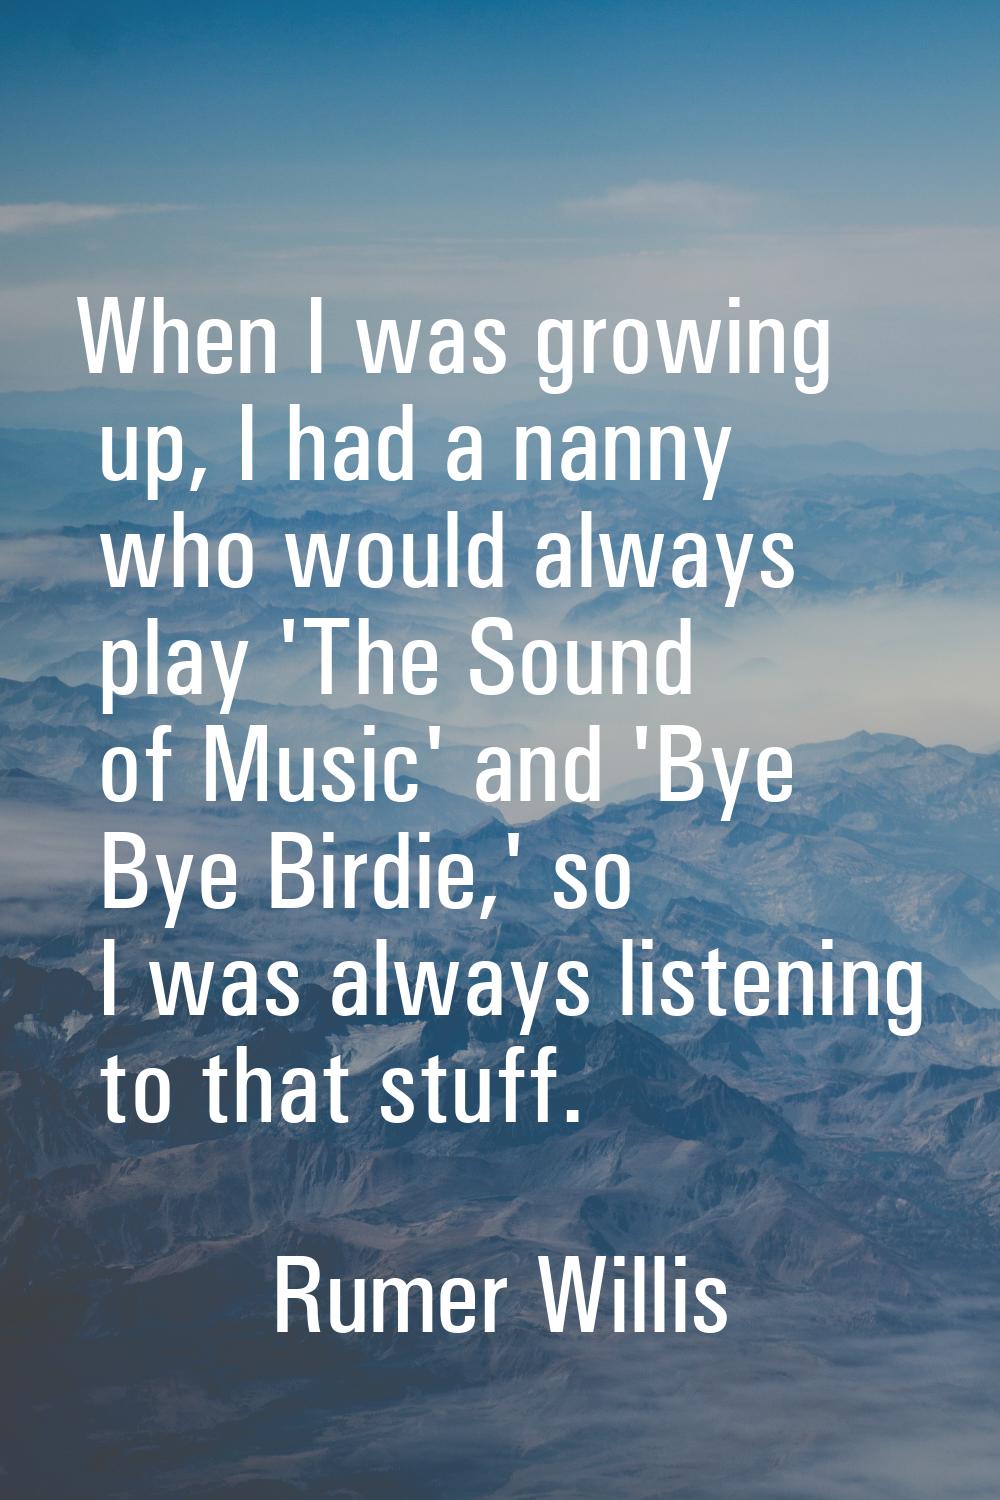 When I was growing up, I had a nanny who would always play 'The Sound of Music' and 'Bye Bye Birdie